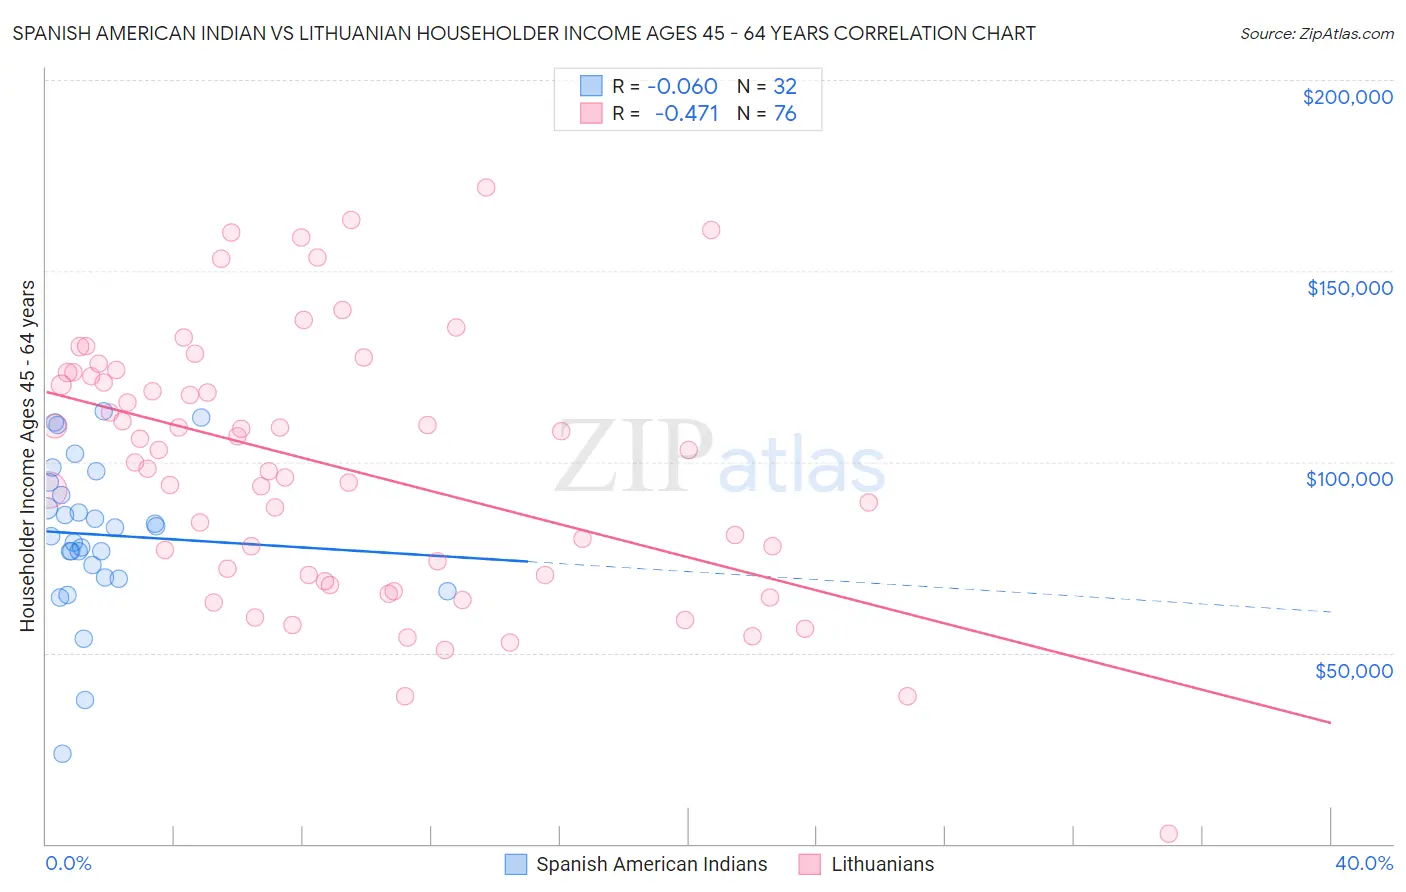 Spanish American Indian vs Lithuanian Householder Income Ages 45 - 64 years